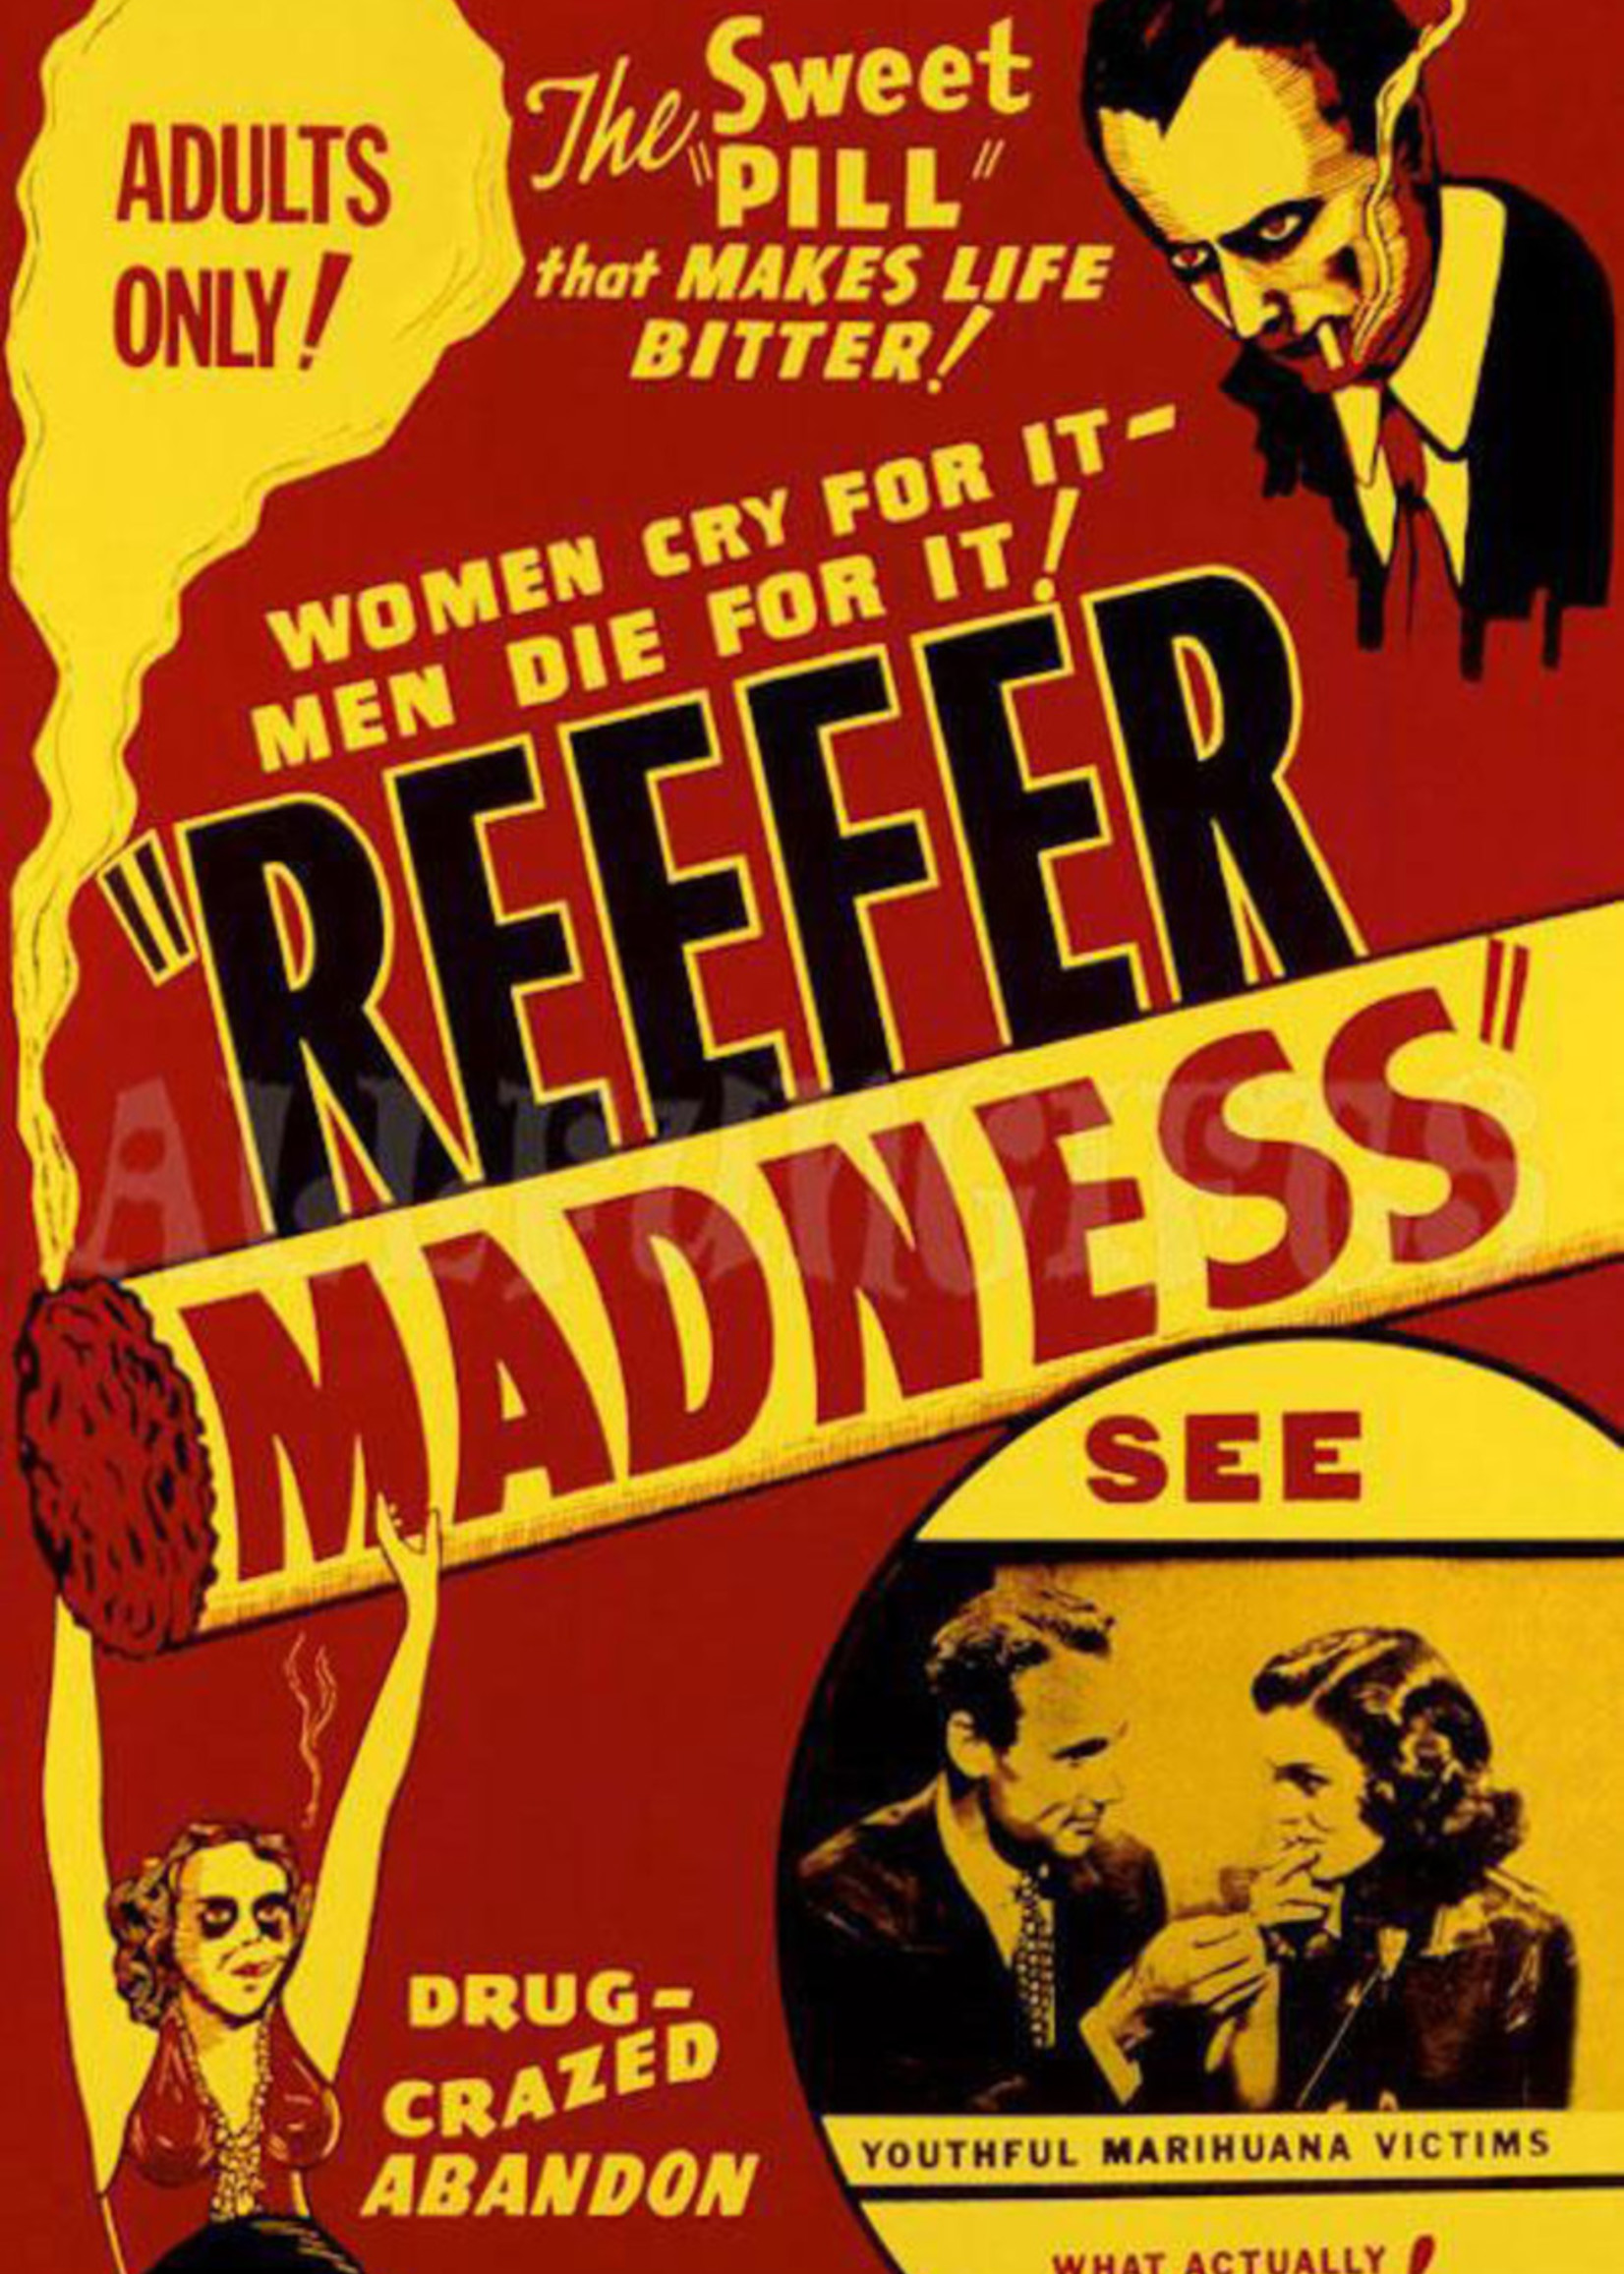 Unbranded 24"x36" "Reefer Madness" Poster